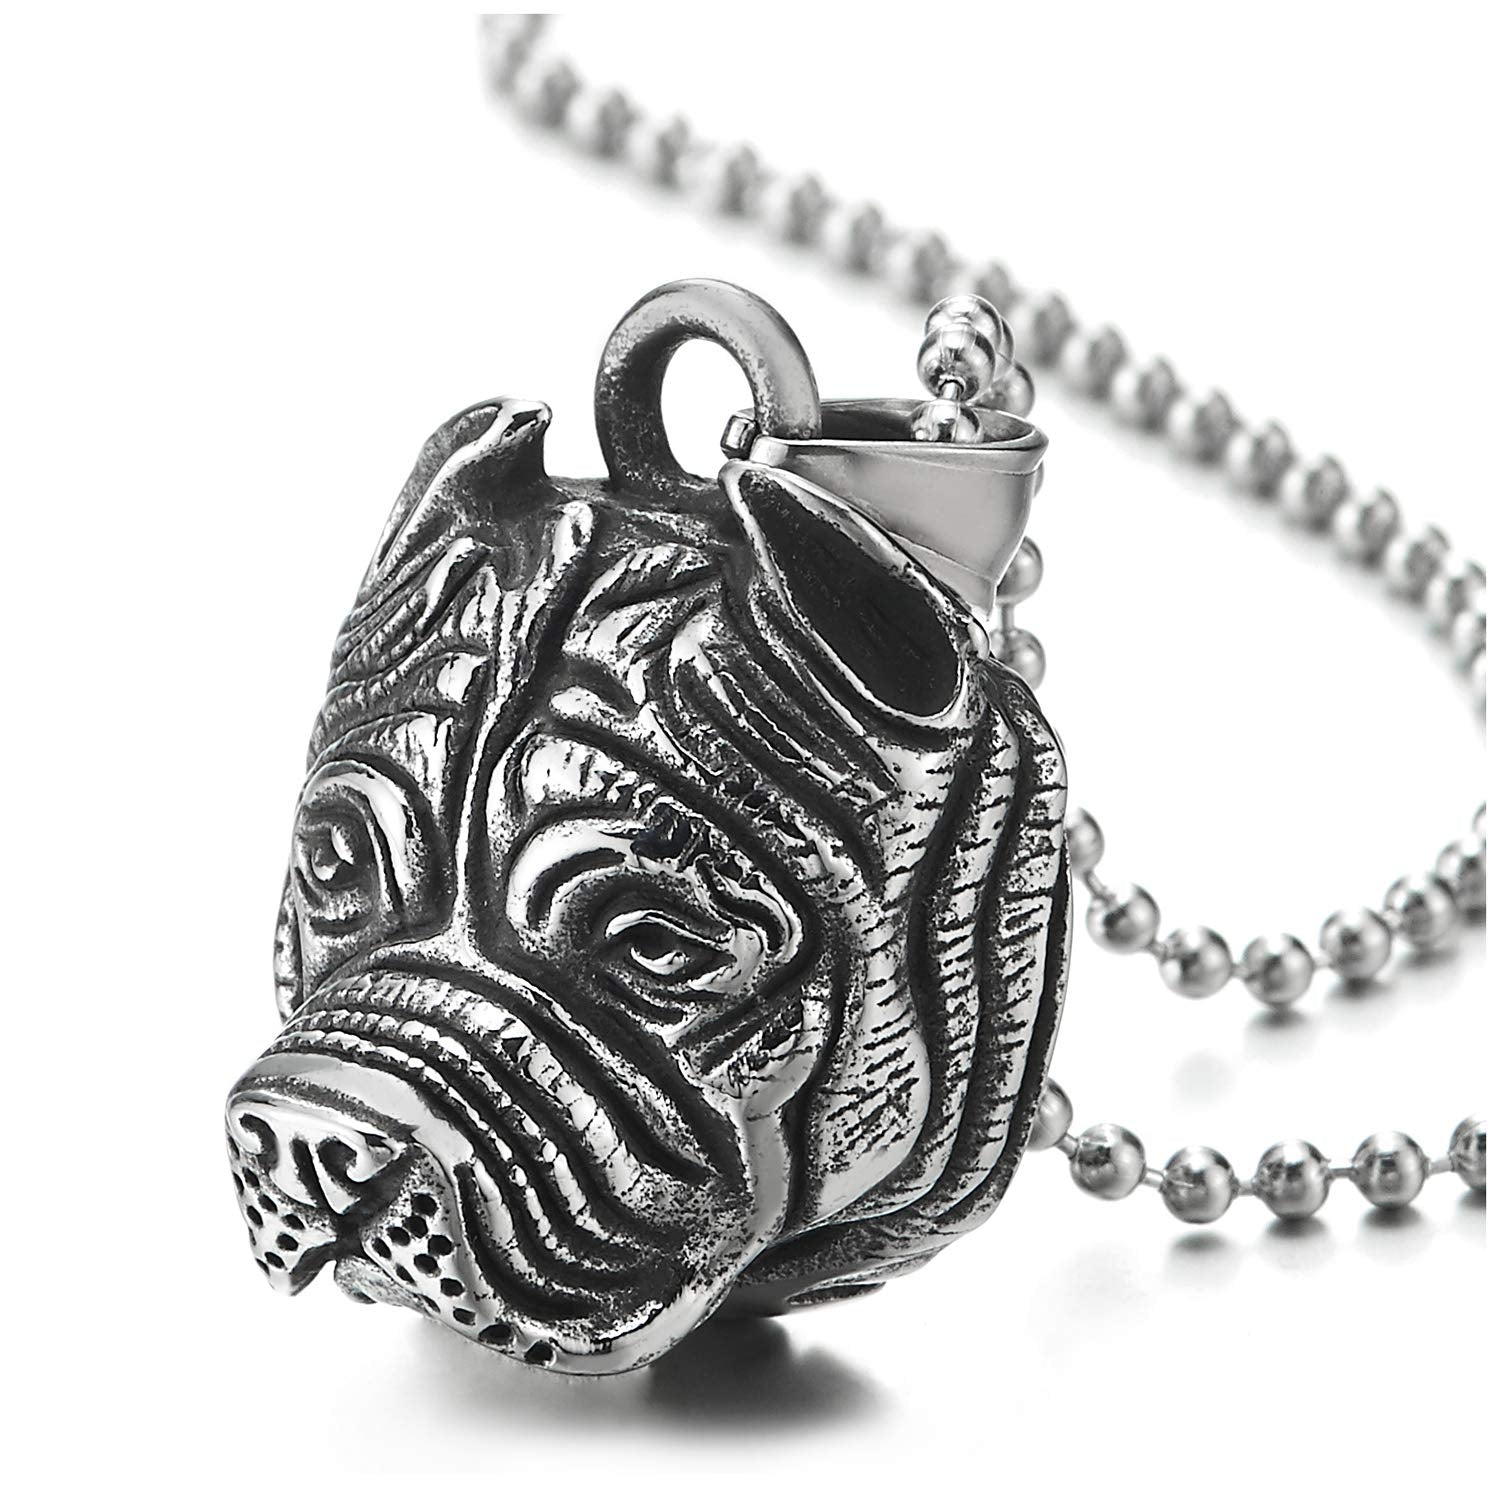 Buy Sterling Silver Pitbull Dog Necklace Tiny Pit Bull Pet Pride Pendant  Big Breed Charm Gift Animal Smiling Love Jewelry Delicate Everyday 5/8  Online in India - Etsy